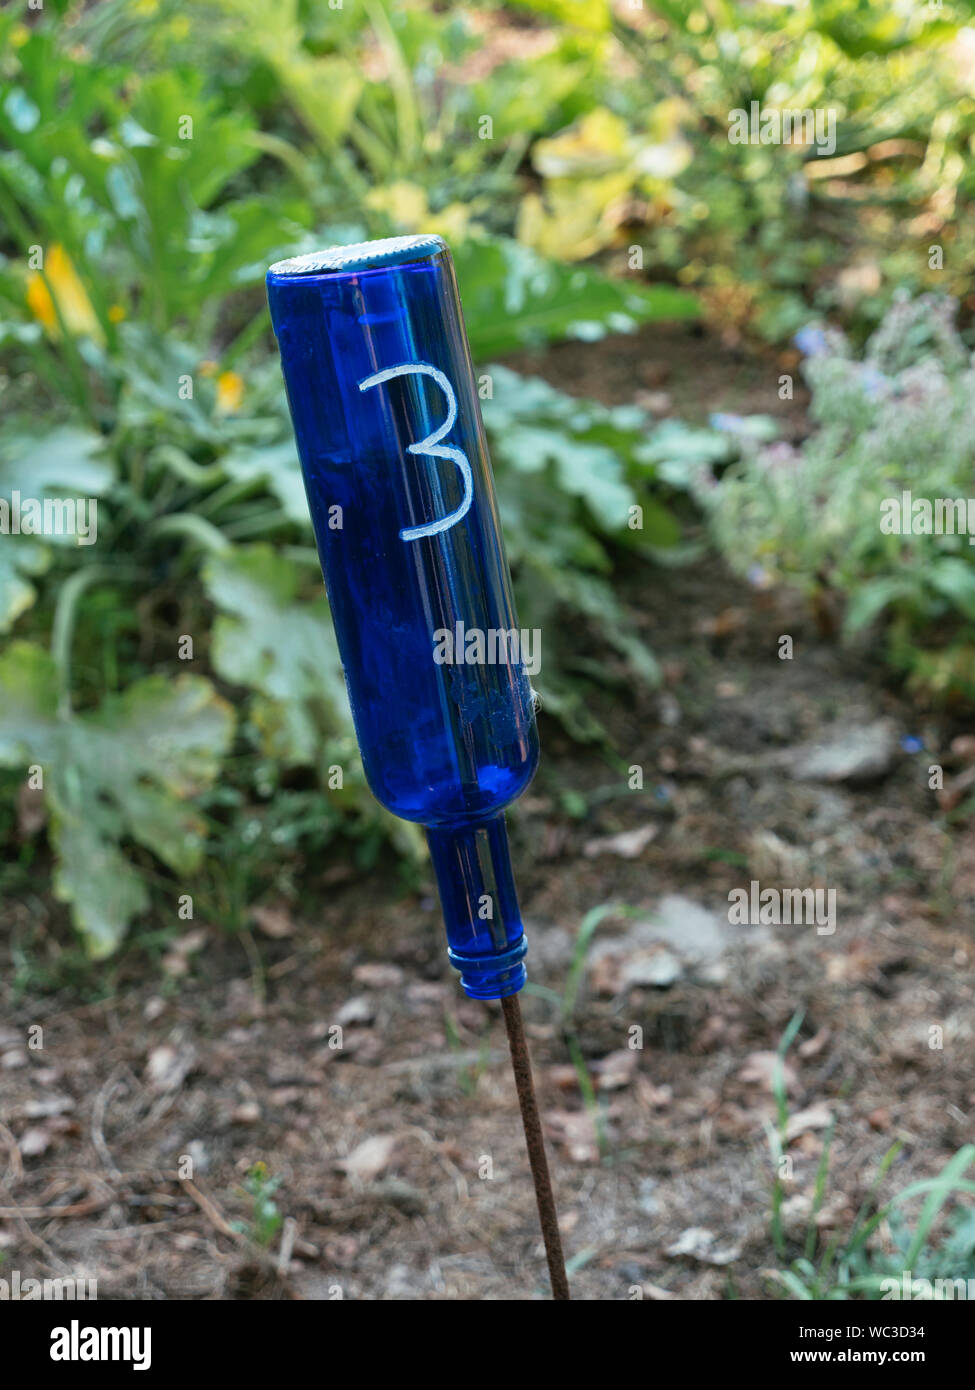 Old blue bottles repurposed to number plots in a vegetable garden with crop rotation. Stock Photo